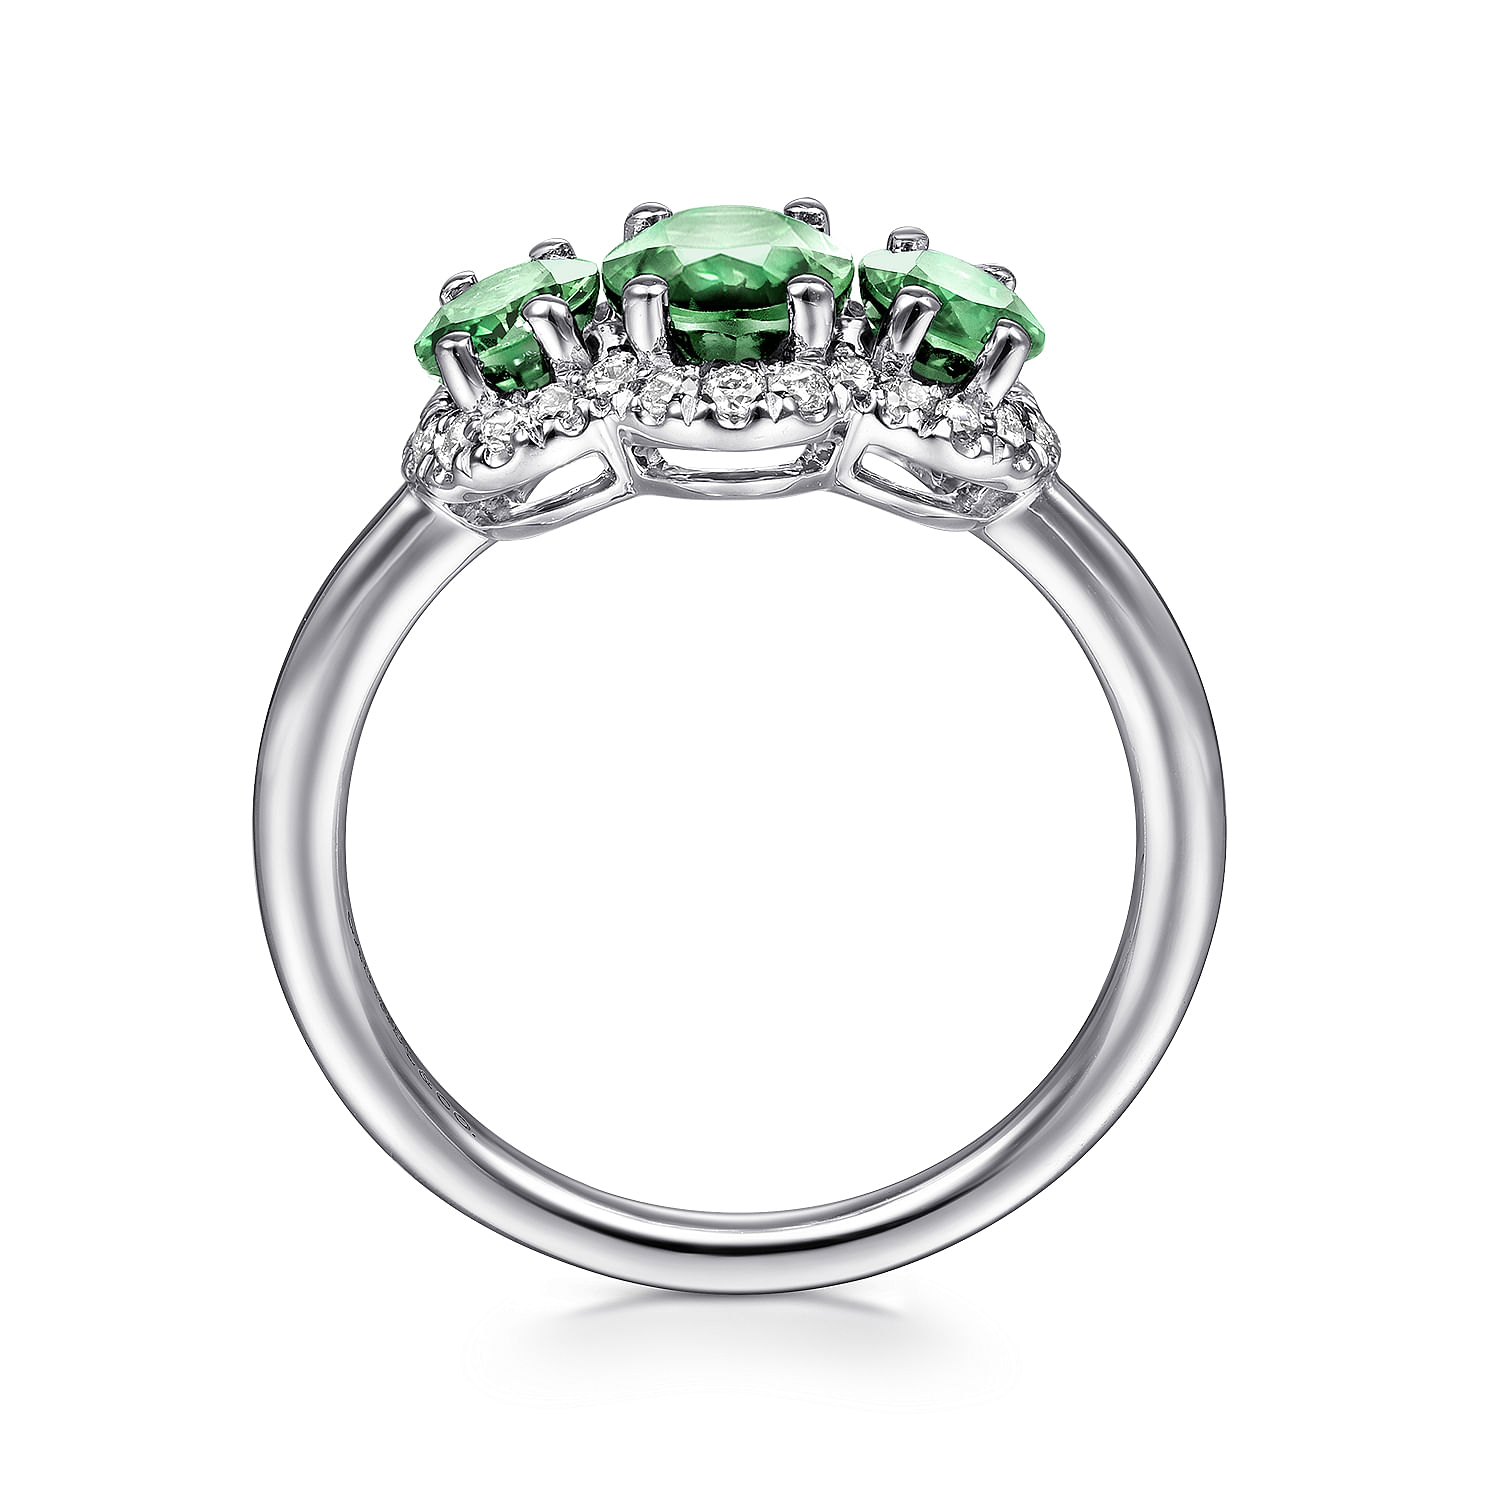 14K White Gold Diamond and Emerald Oval Halo Ring